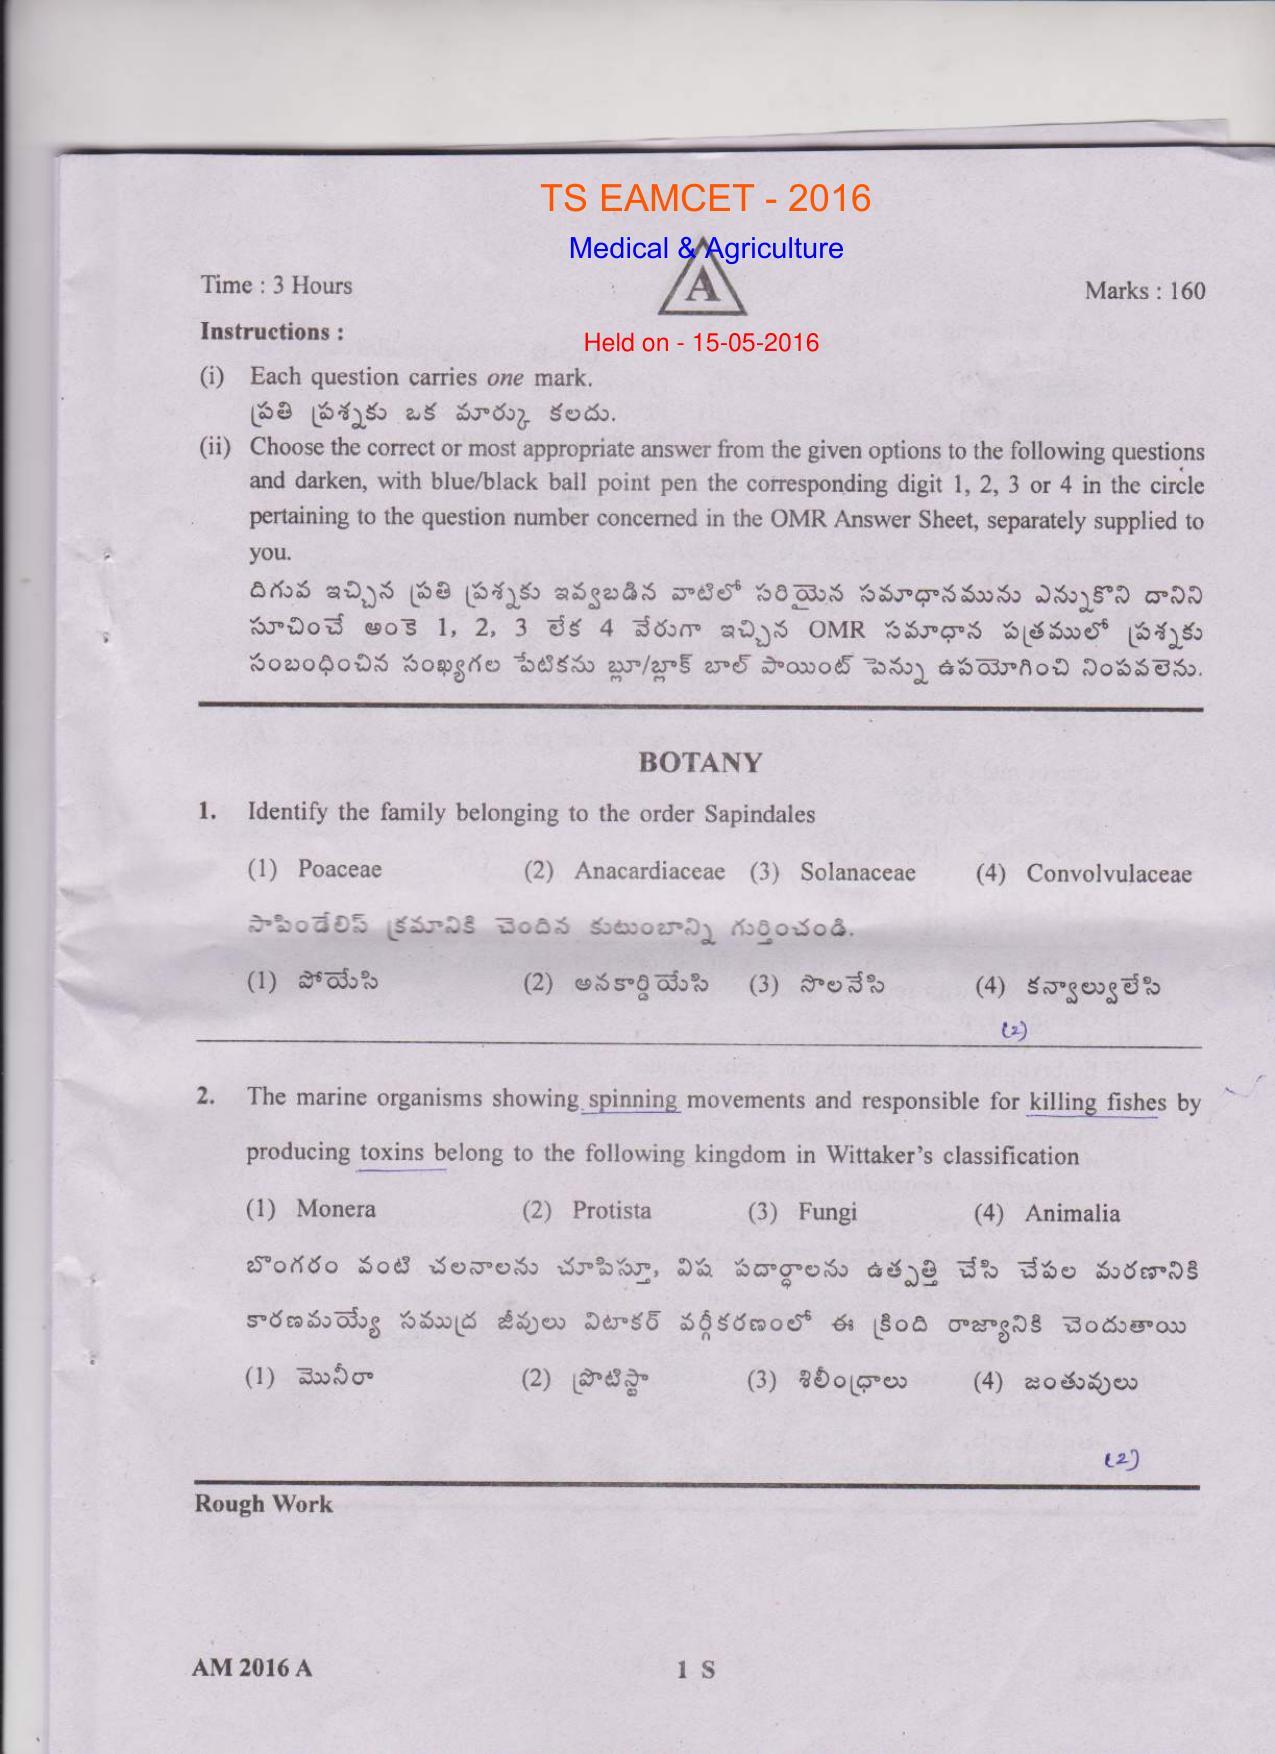 TS EAMCET 2016 Question Paper - Medical & Agriculture - Page 1